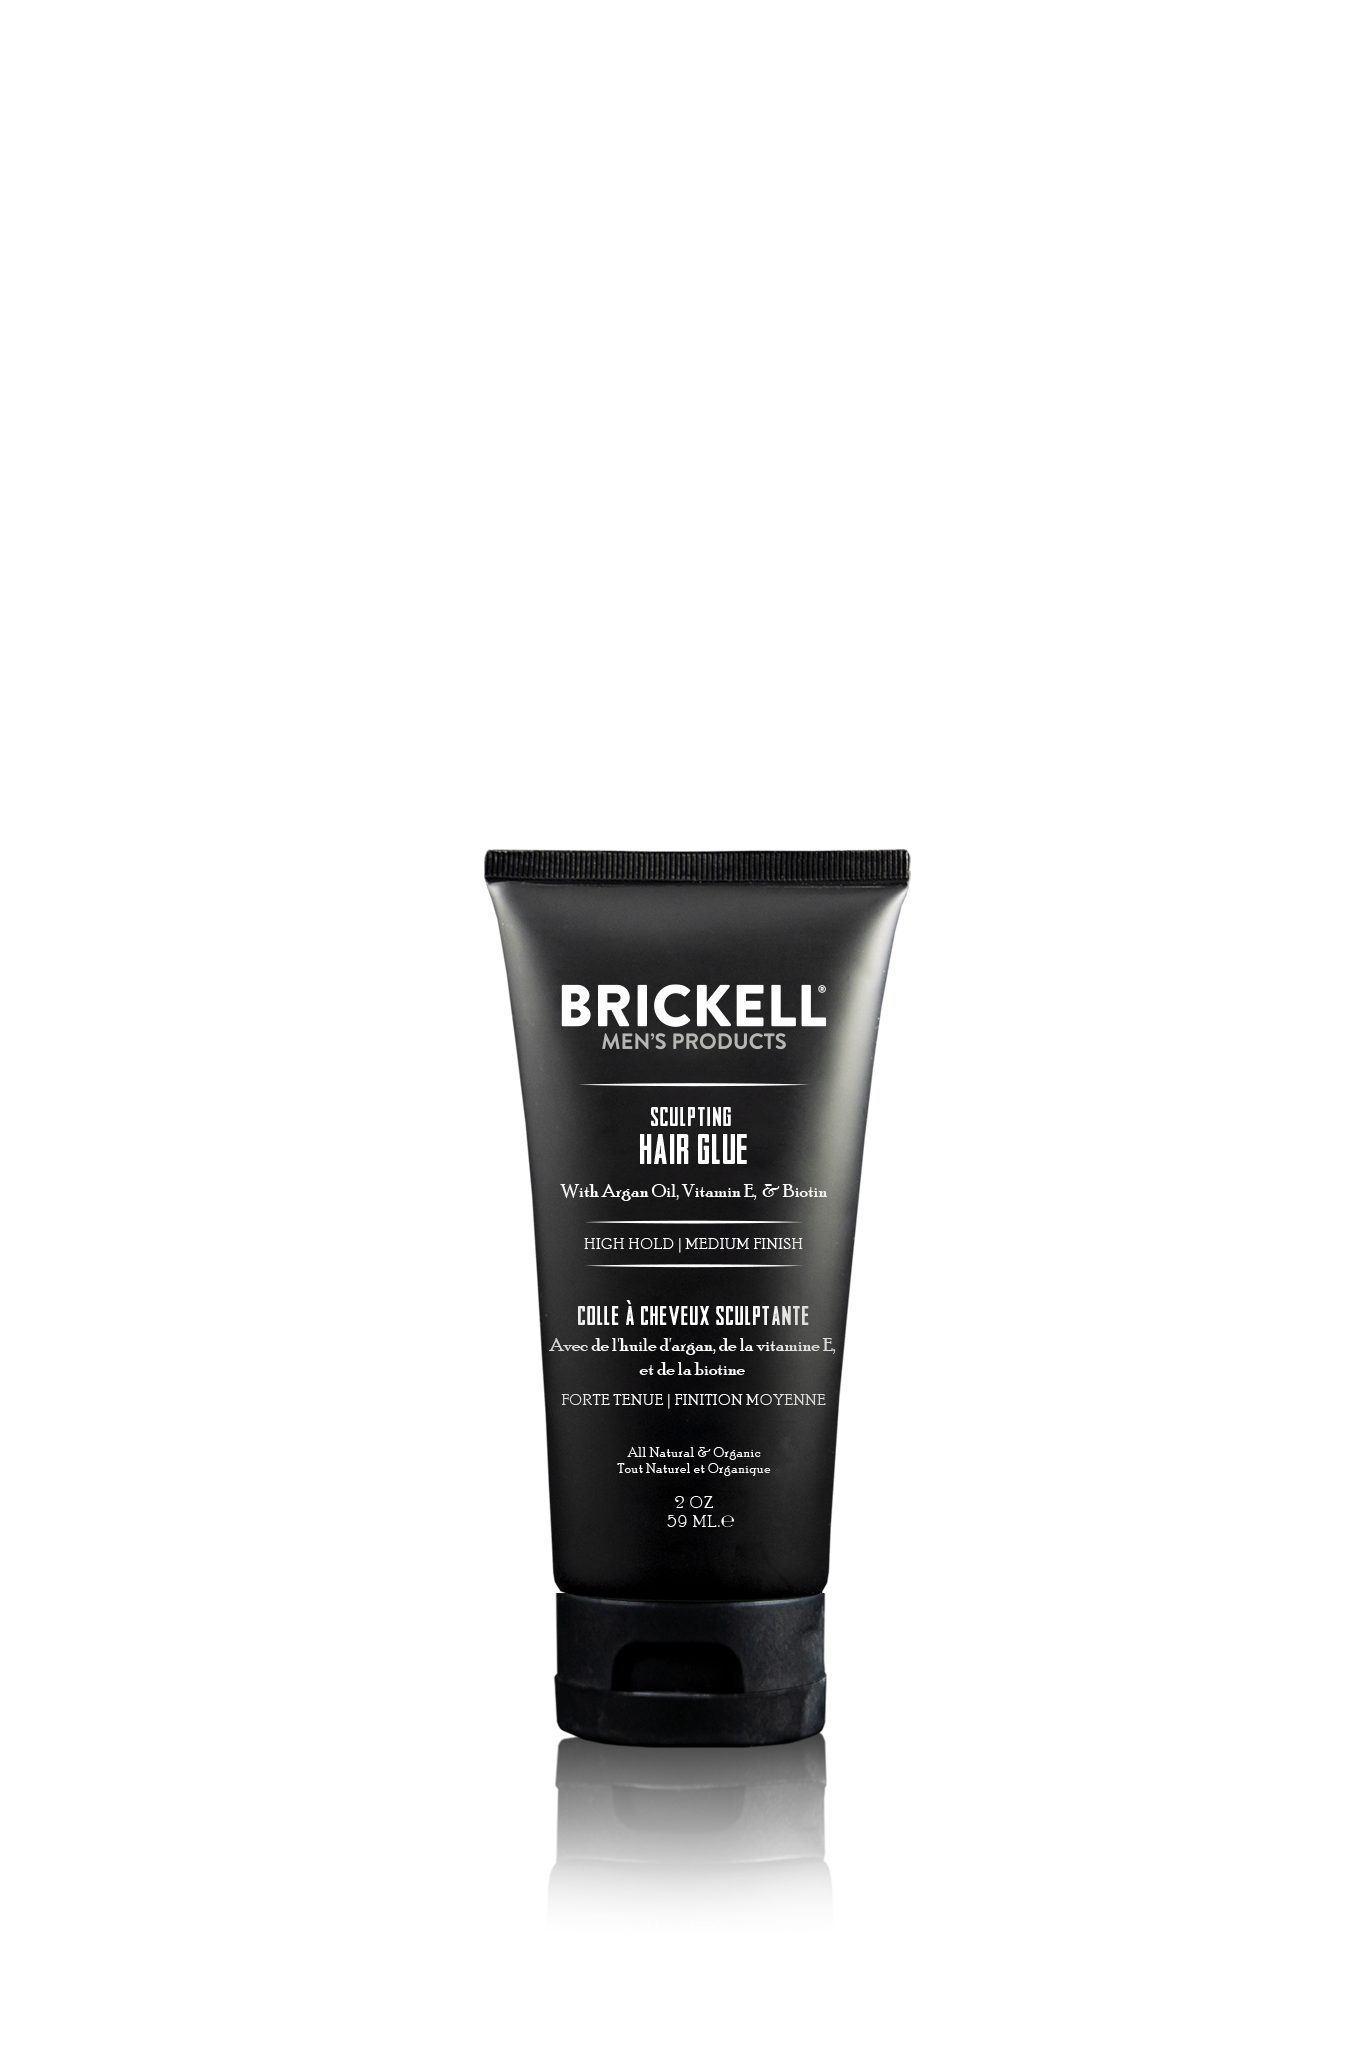 Brickell Men's Products, Natural Hair Product, Glue for Hair, Best Spiking Gel